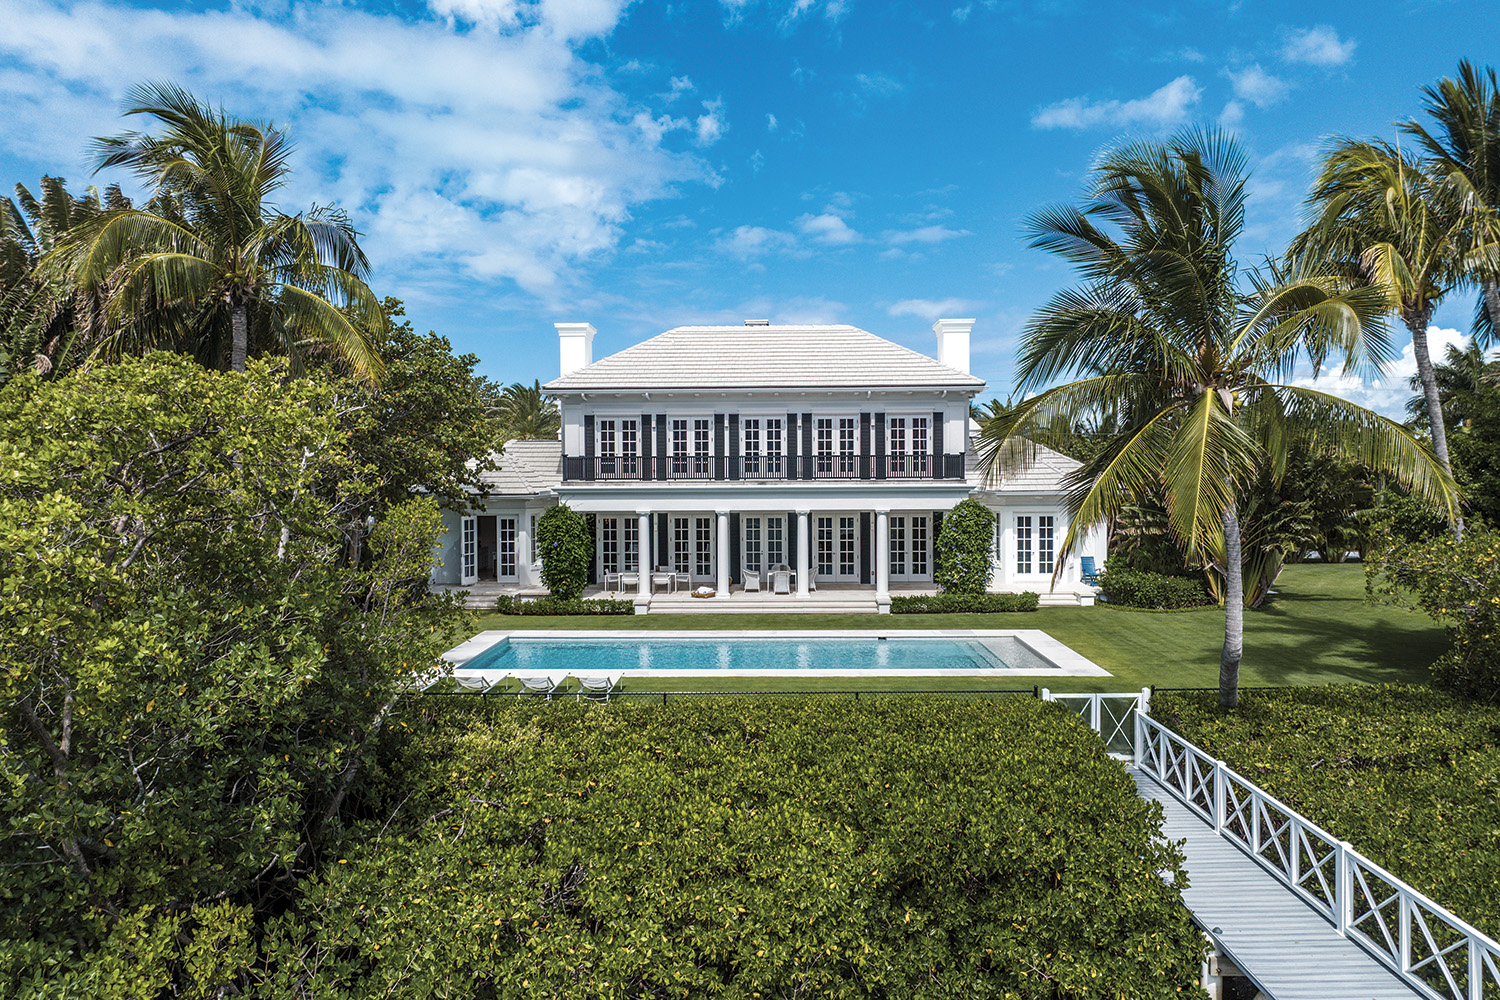 Why the Palm Beach Real Estate Scene Is Hotter Than Ever Galerie